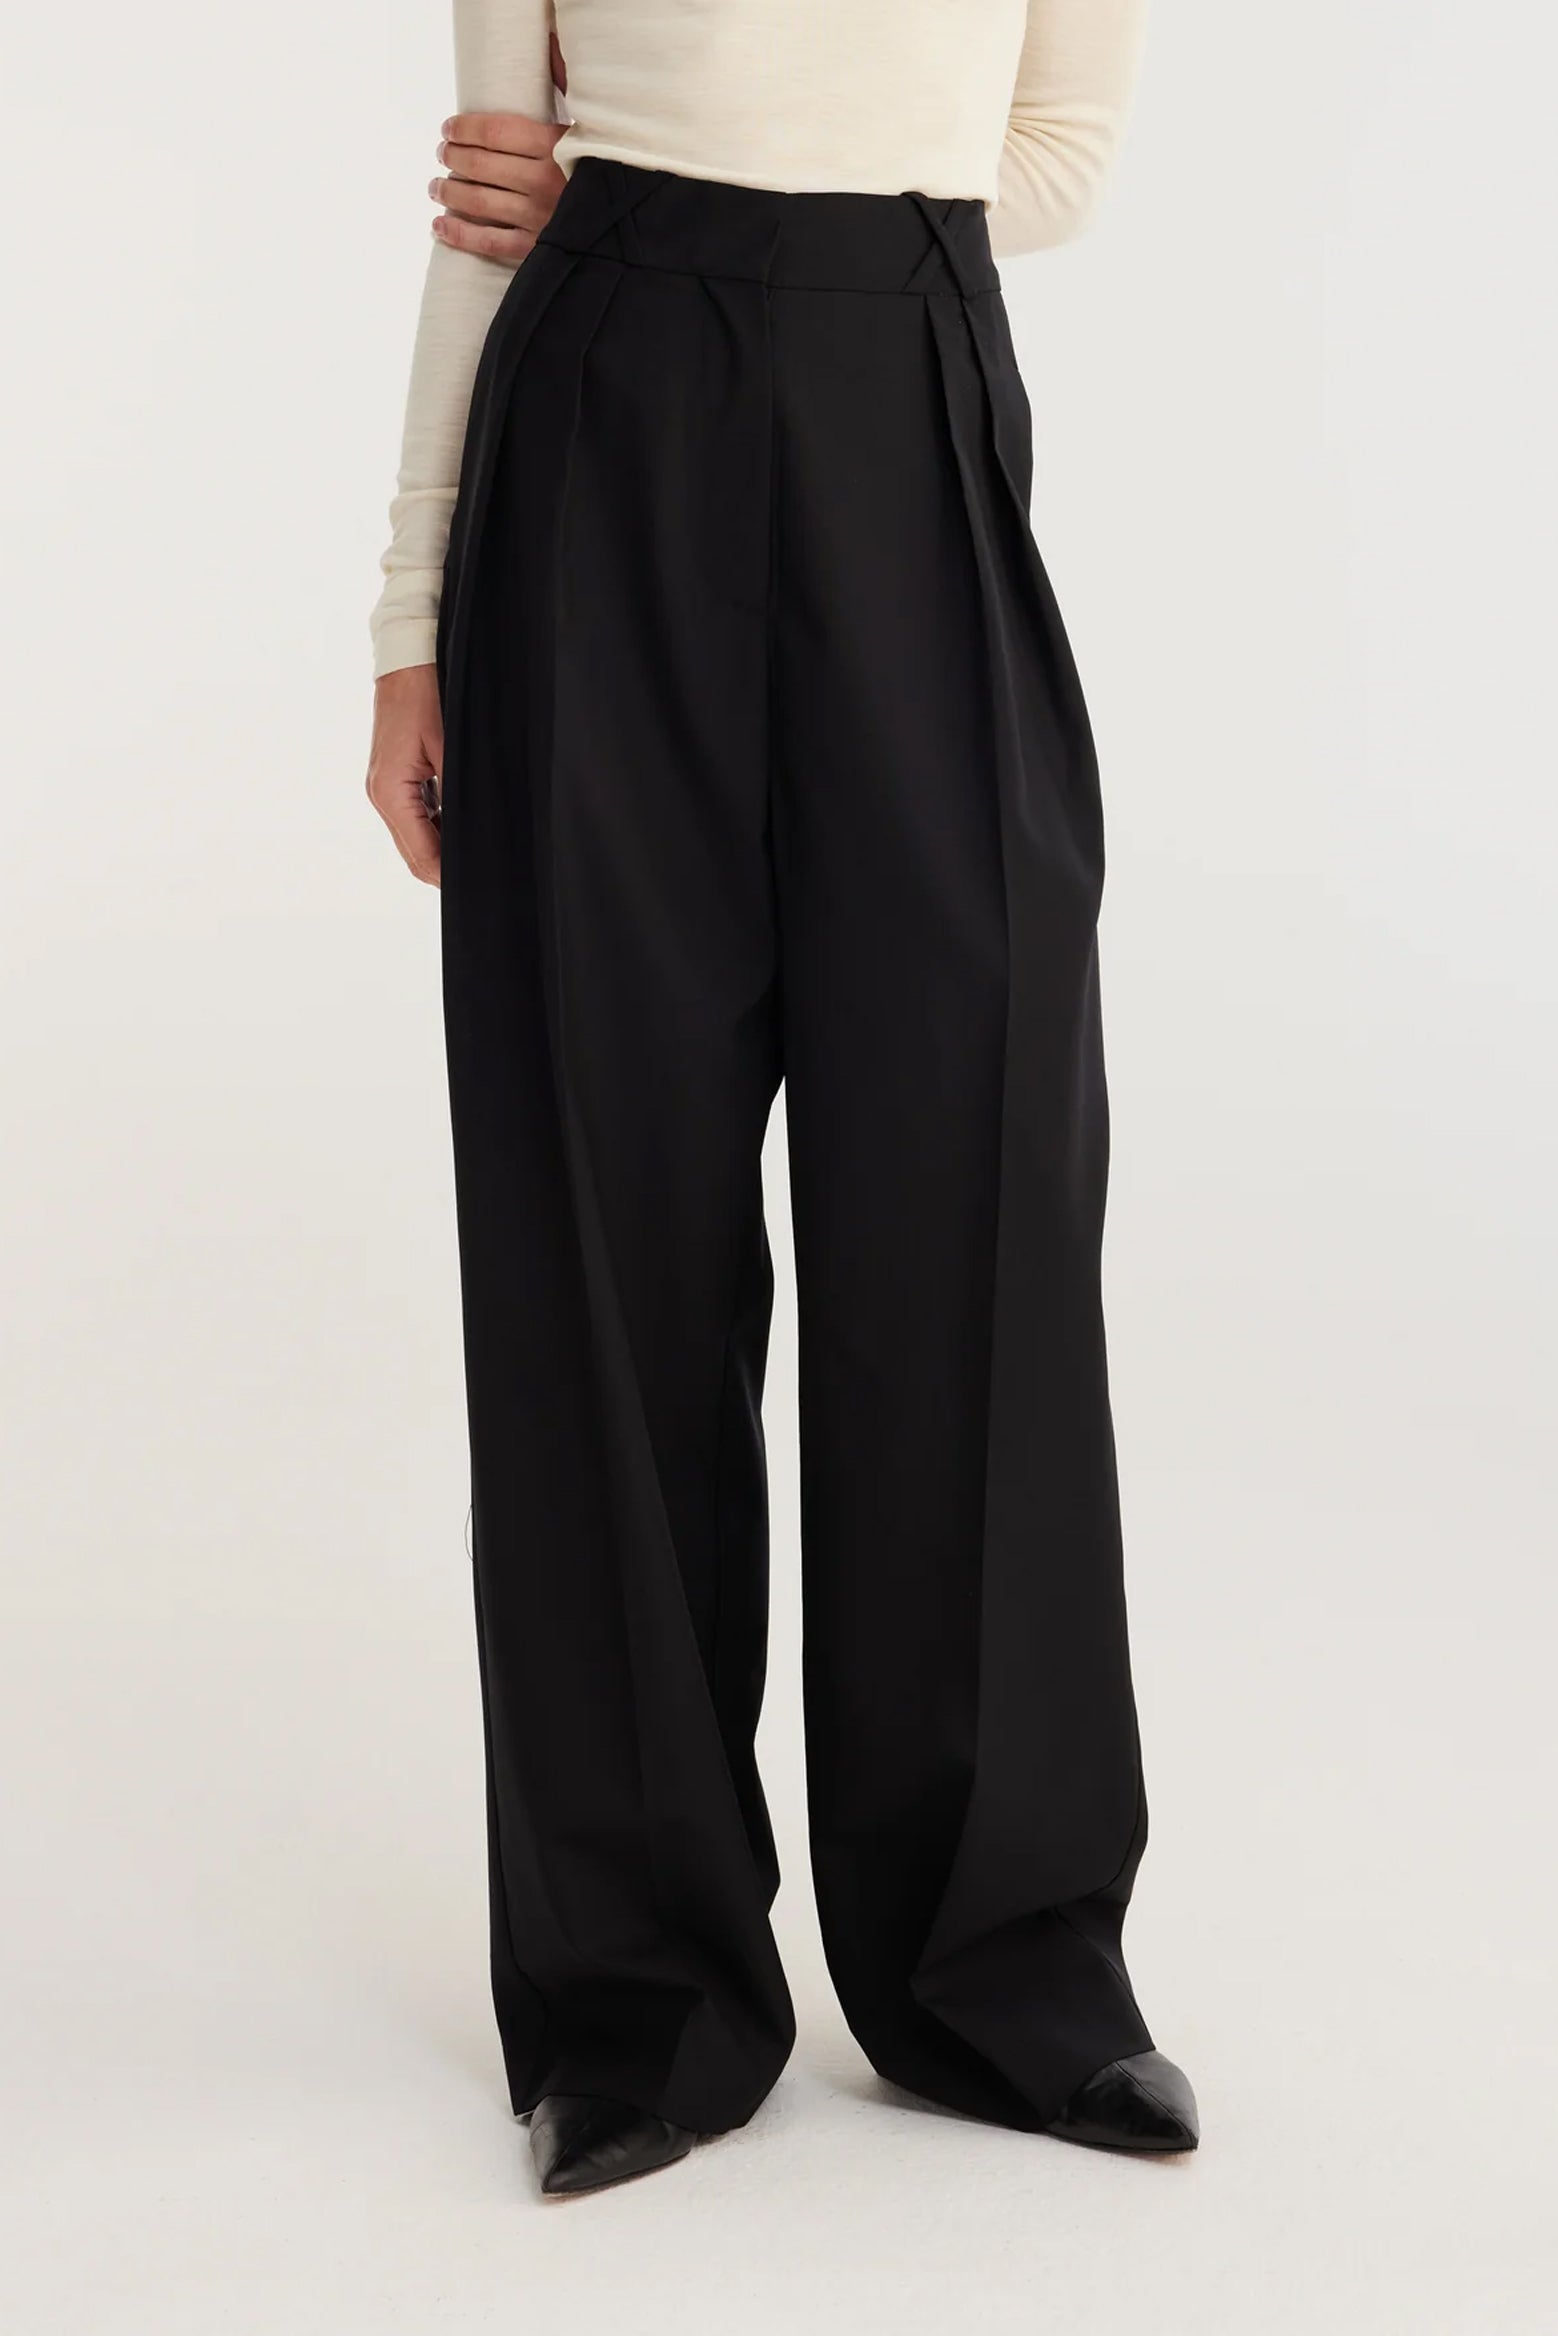 Rohe Wide Leg Tailored Trouser in Noir available at The New Trend Australia.